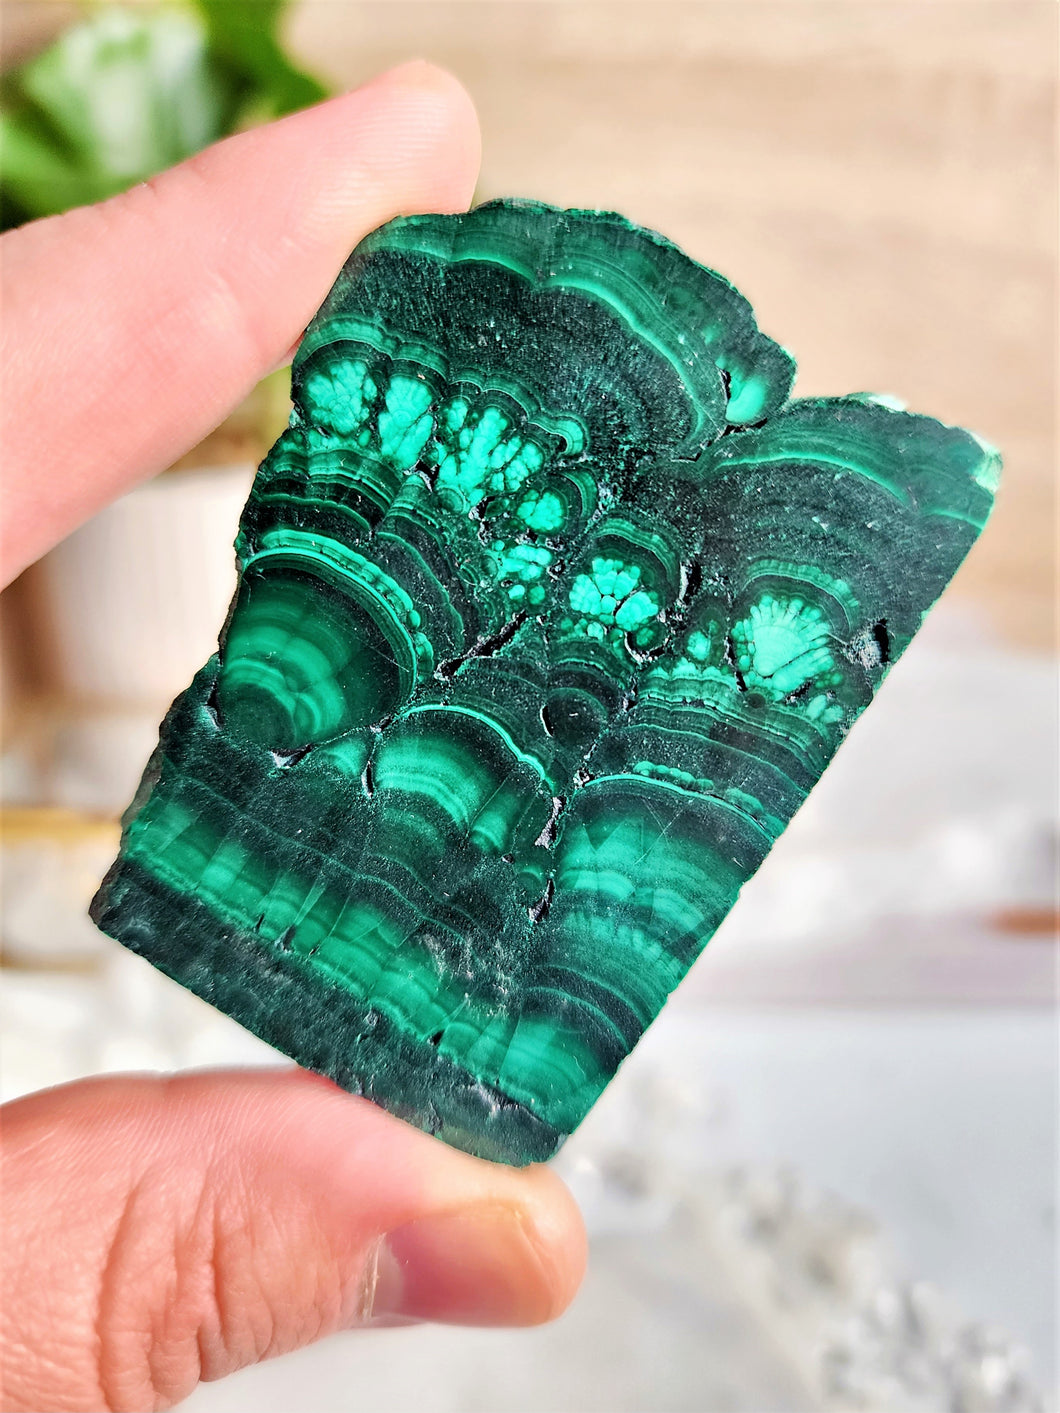 Malachite is believed to possess strong spiritual properties that are associated with protection, transformation, and its ability to aid in emotional healing and spiritual growth